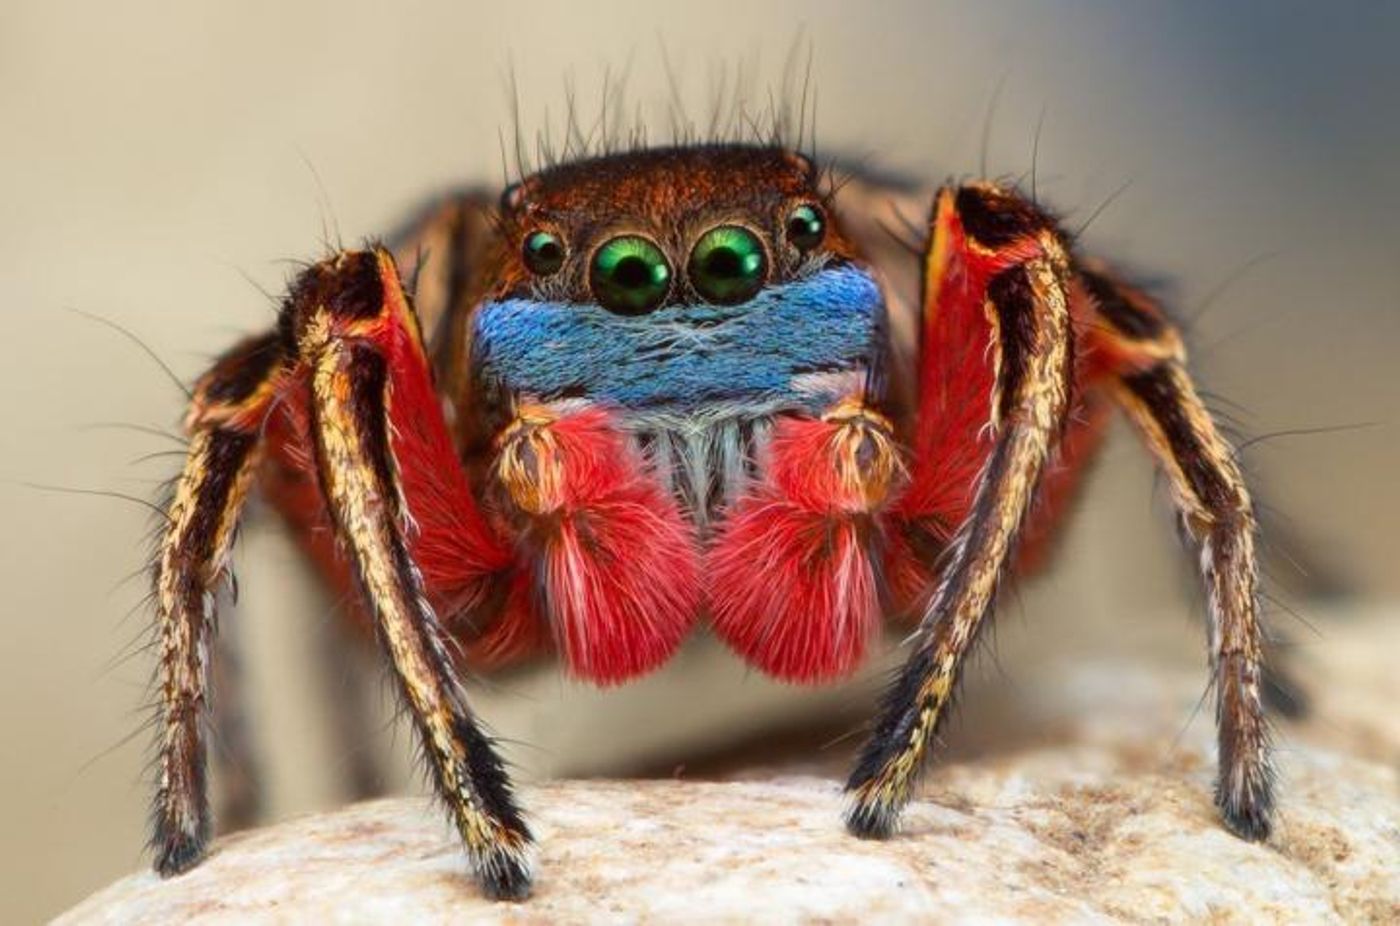 A male North American Habronattus jumping spider shows off his brightly colored face, legs and knees as he prepares to flash his kaleidoscope of colors during an elaborate mating dance ritual. Credit: Thomas Shahan